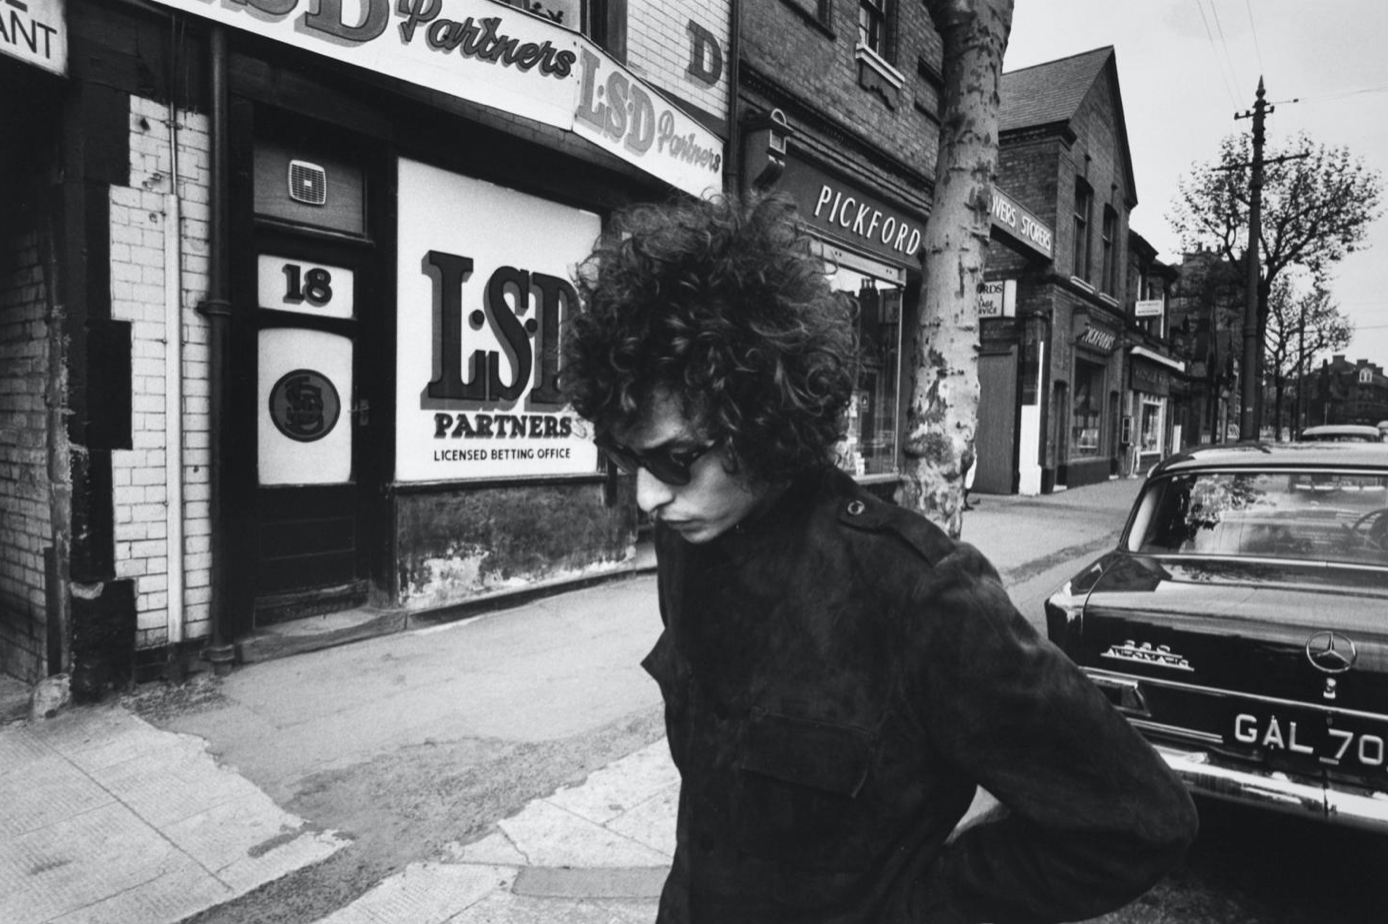 Bob Dylan in front of betting office, Sheffield, England, 1966.